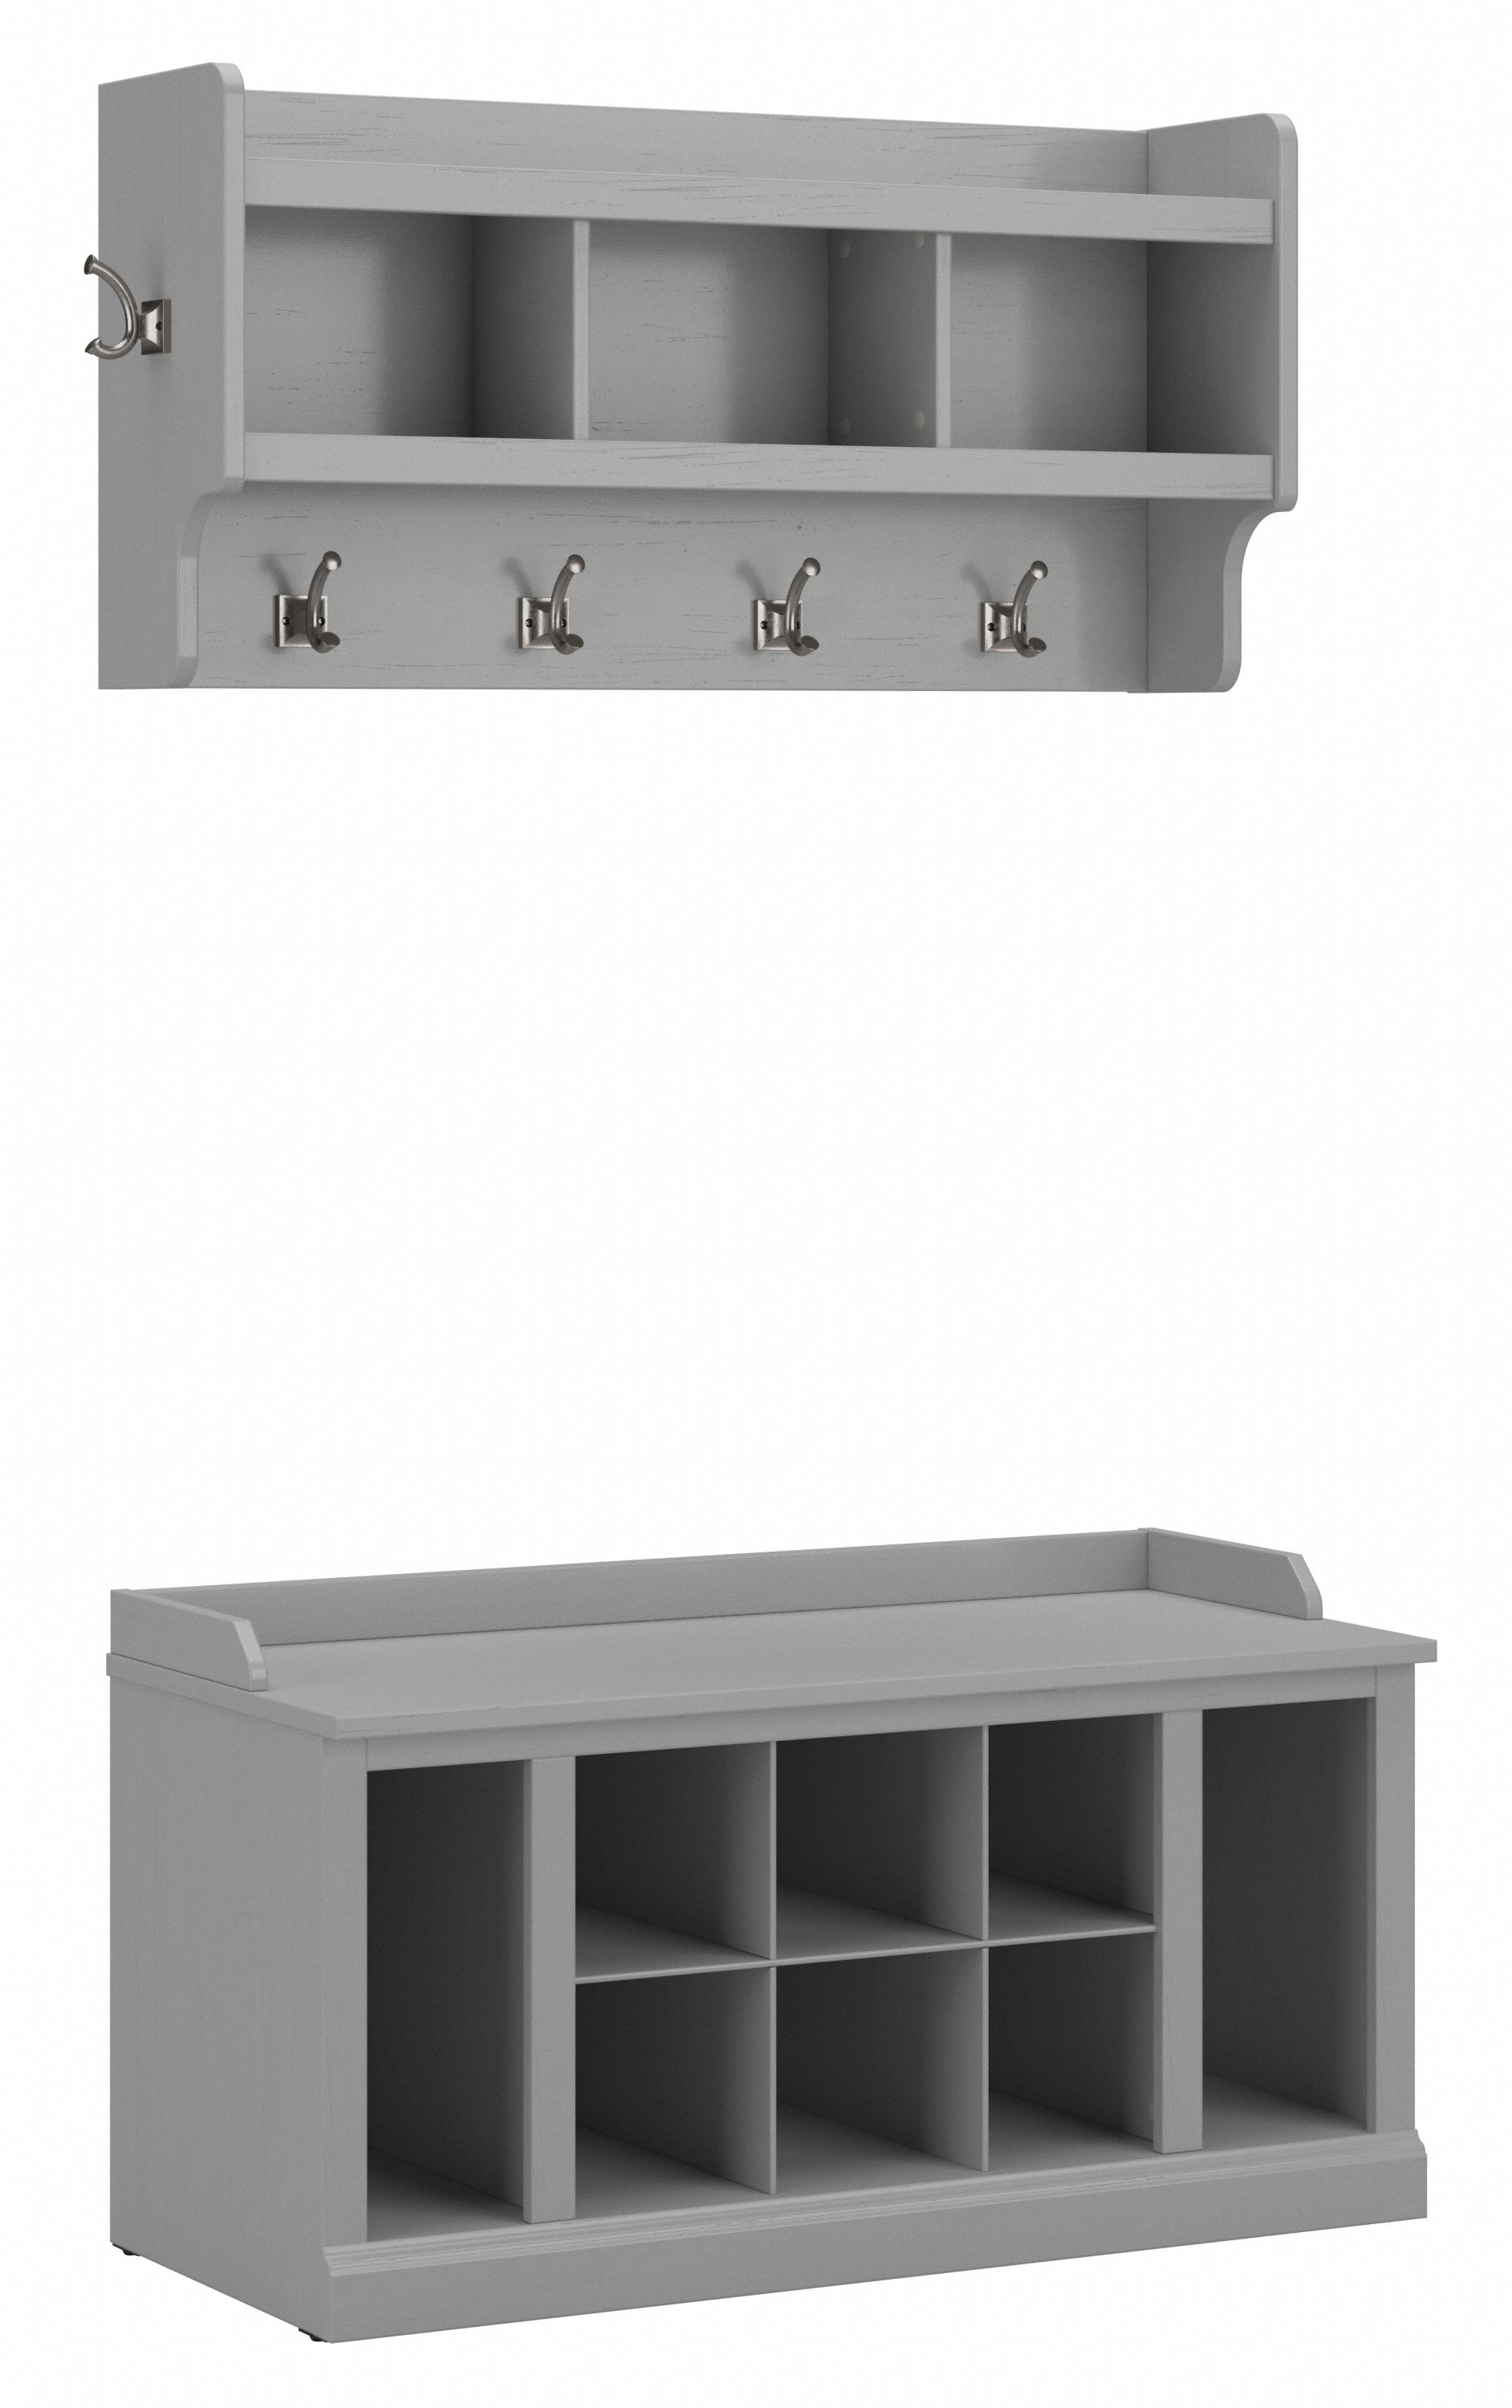 Shop Bush Furniture Woodland 40W Shoe Storage Bench with Shelves and Wall Mounted Coat Rack 02 WDL004CG #color_cape cod gray